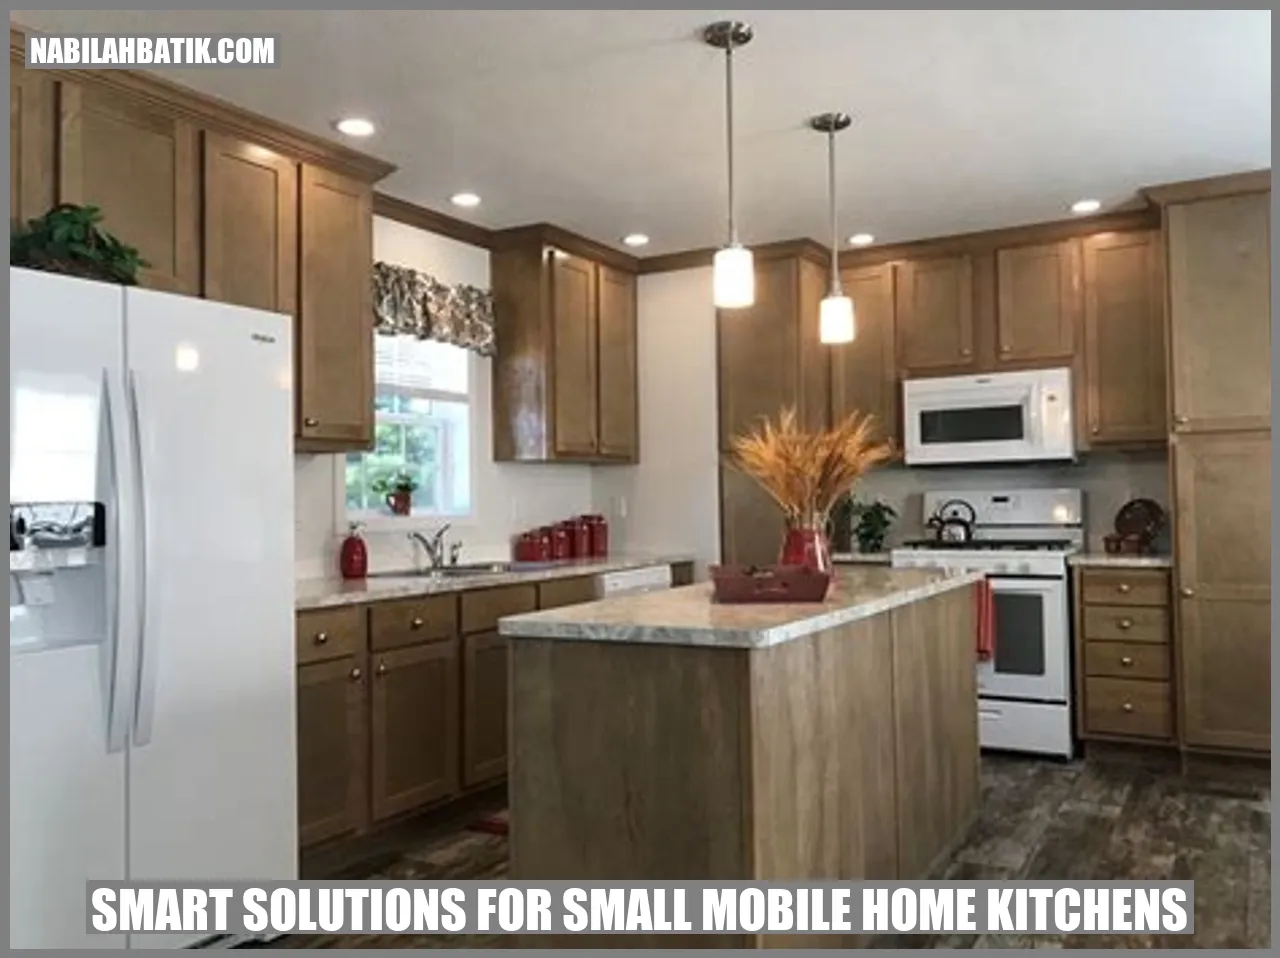 Smart Solutions for Small Mobile Home Kitchens